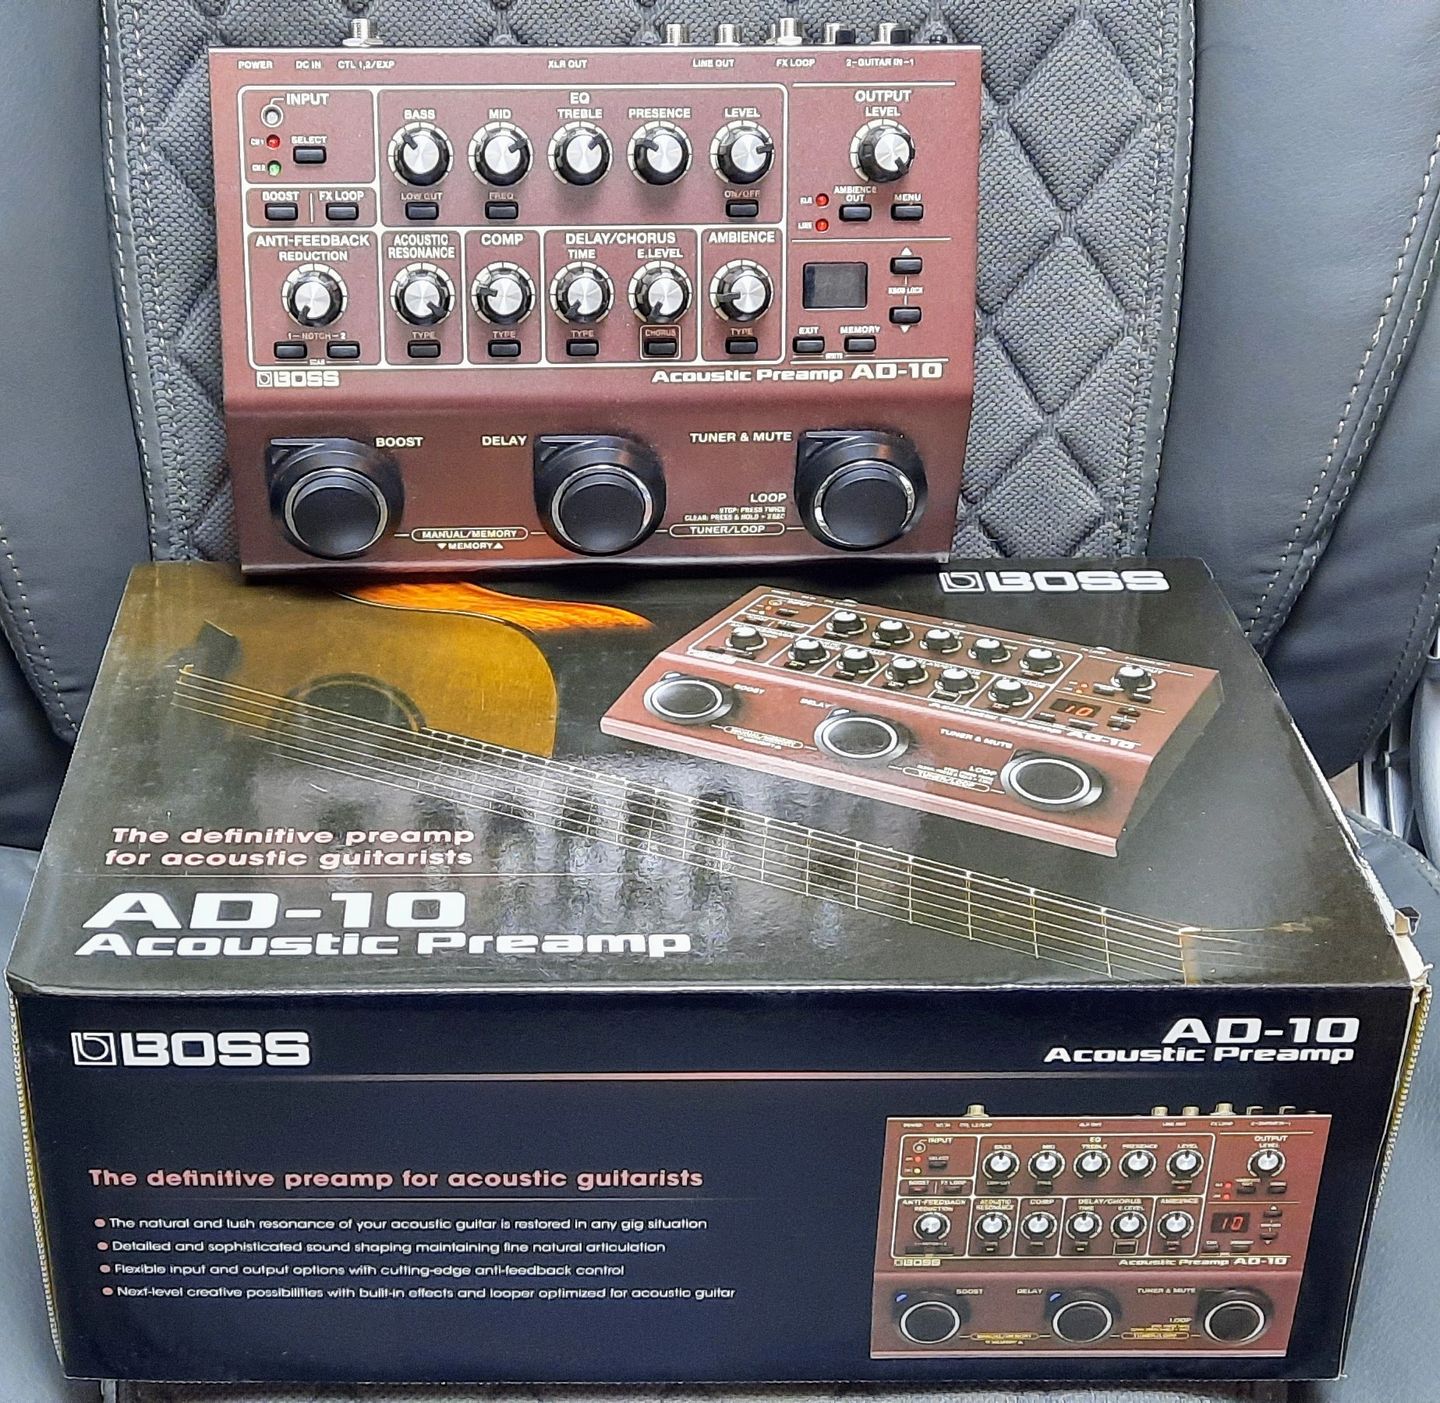 Sold - Boss AD-10 Acoustic Preamp and Looper | The Gear Page